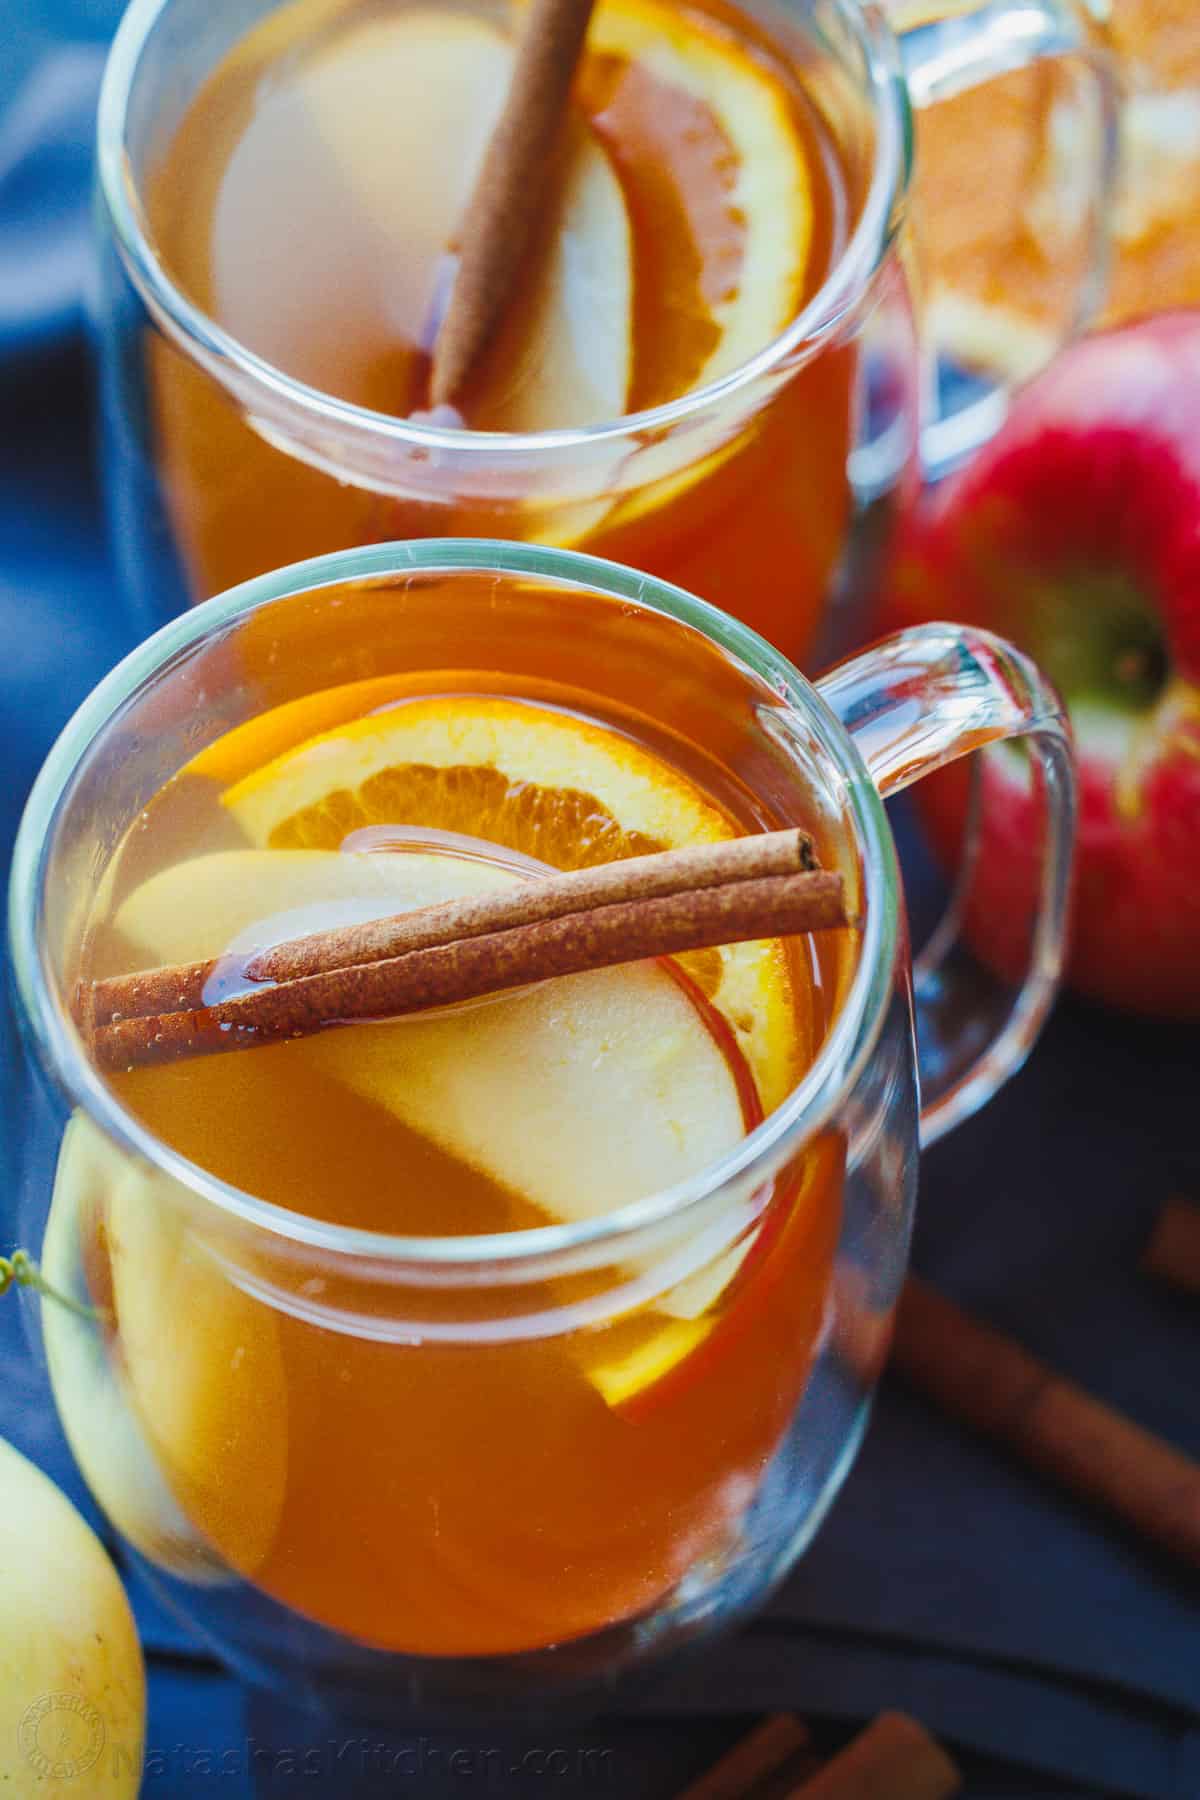 Two glass mugs of apple cider topped with apples, oranges, and cinnamon sticks